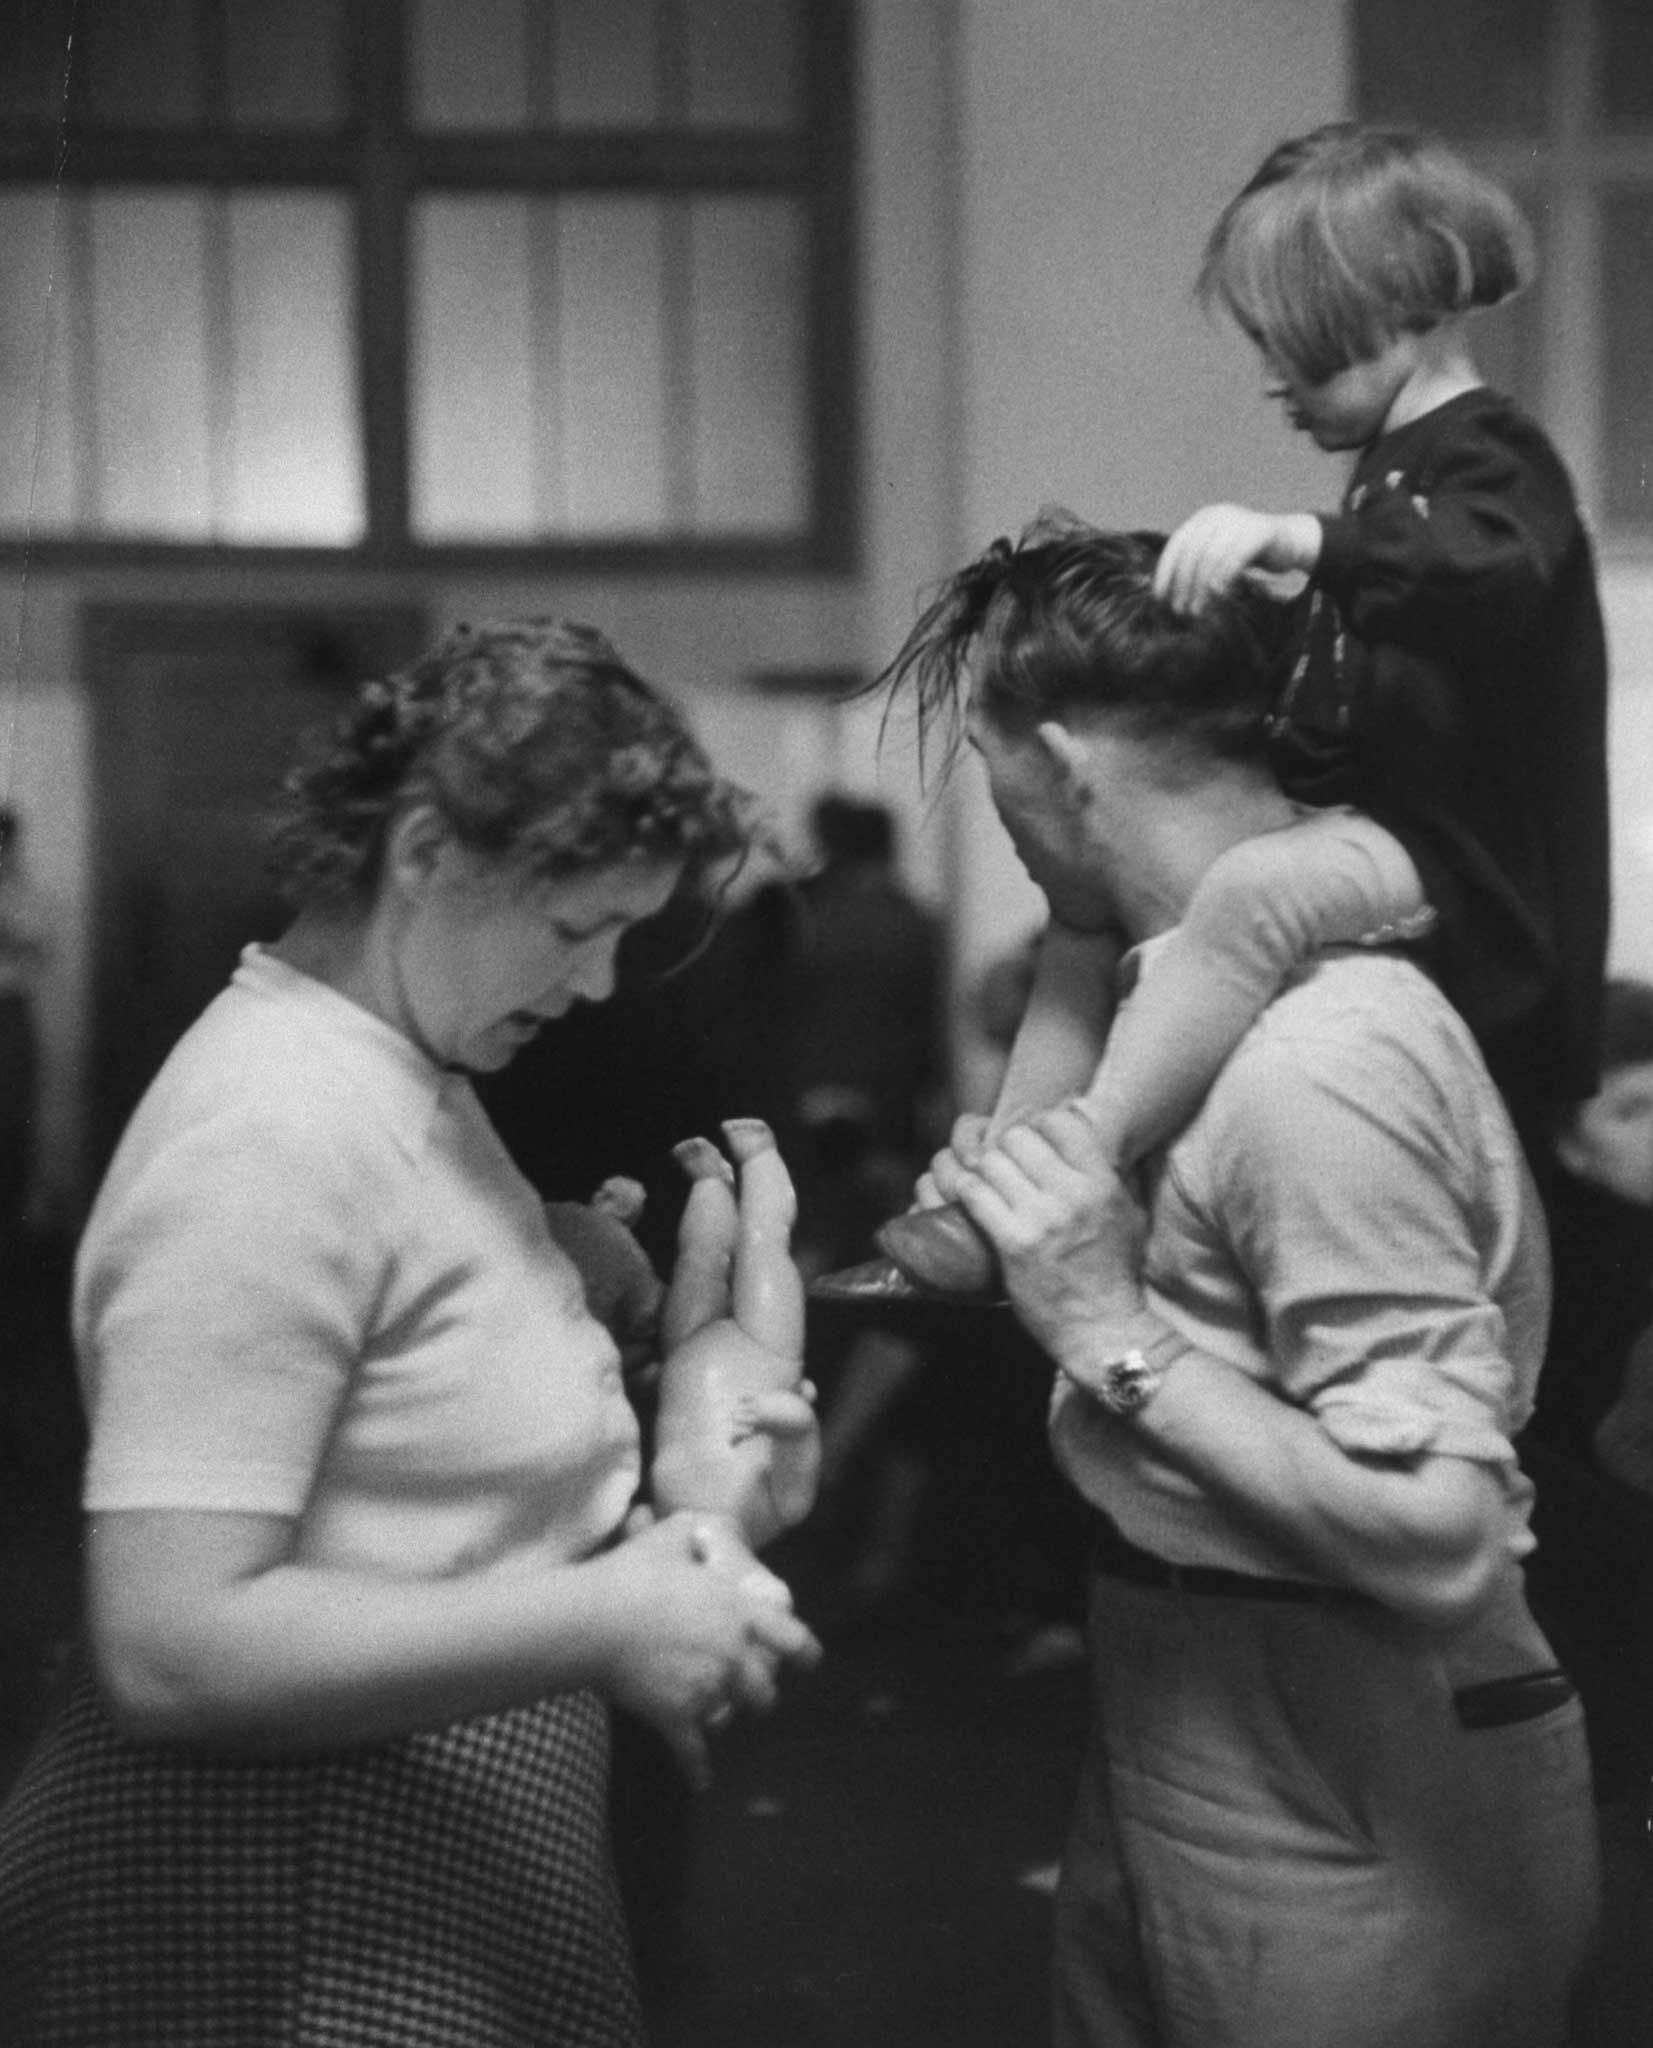 "Exhausted parents in recreation hall try to keep their child amused and quiet. Most of them will put up with endless piggyback riding, hair-pulling -- anything -- to get relief from the bewildered crying."